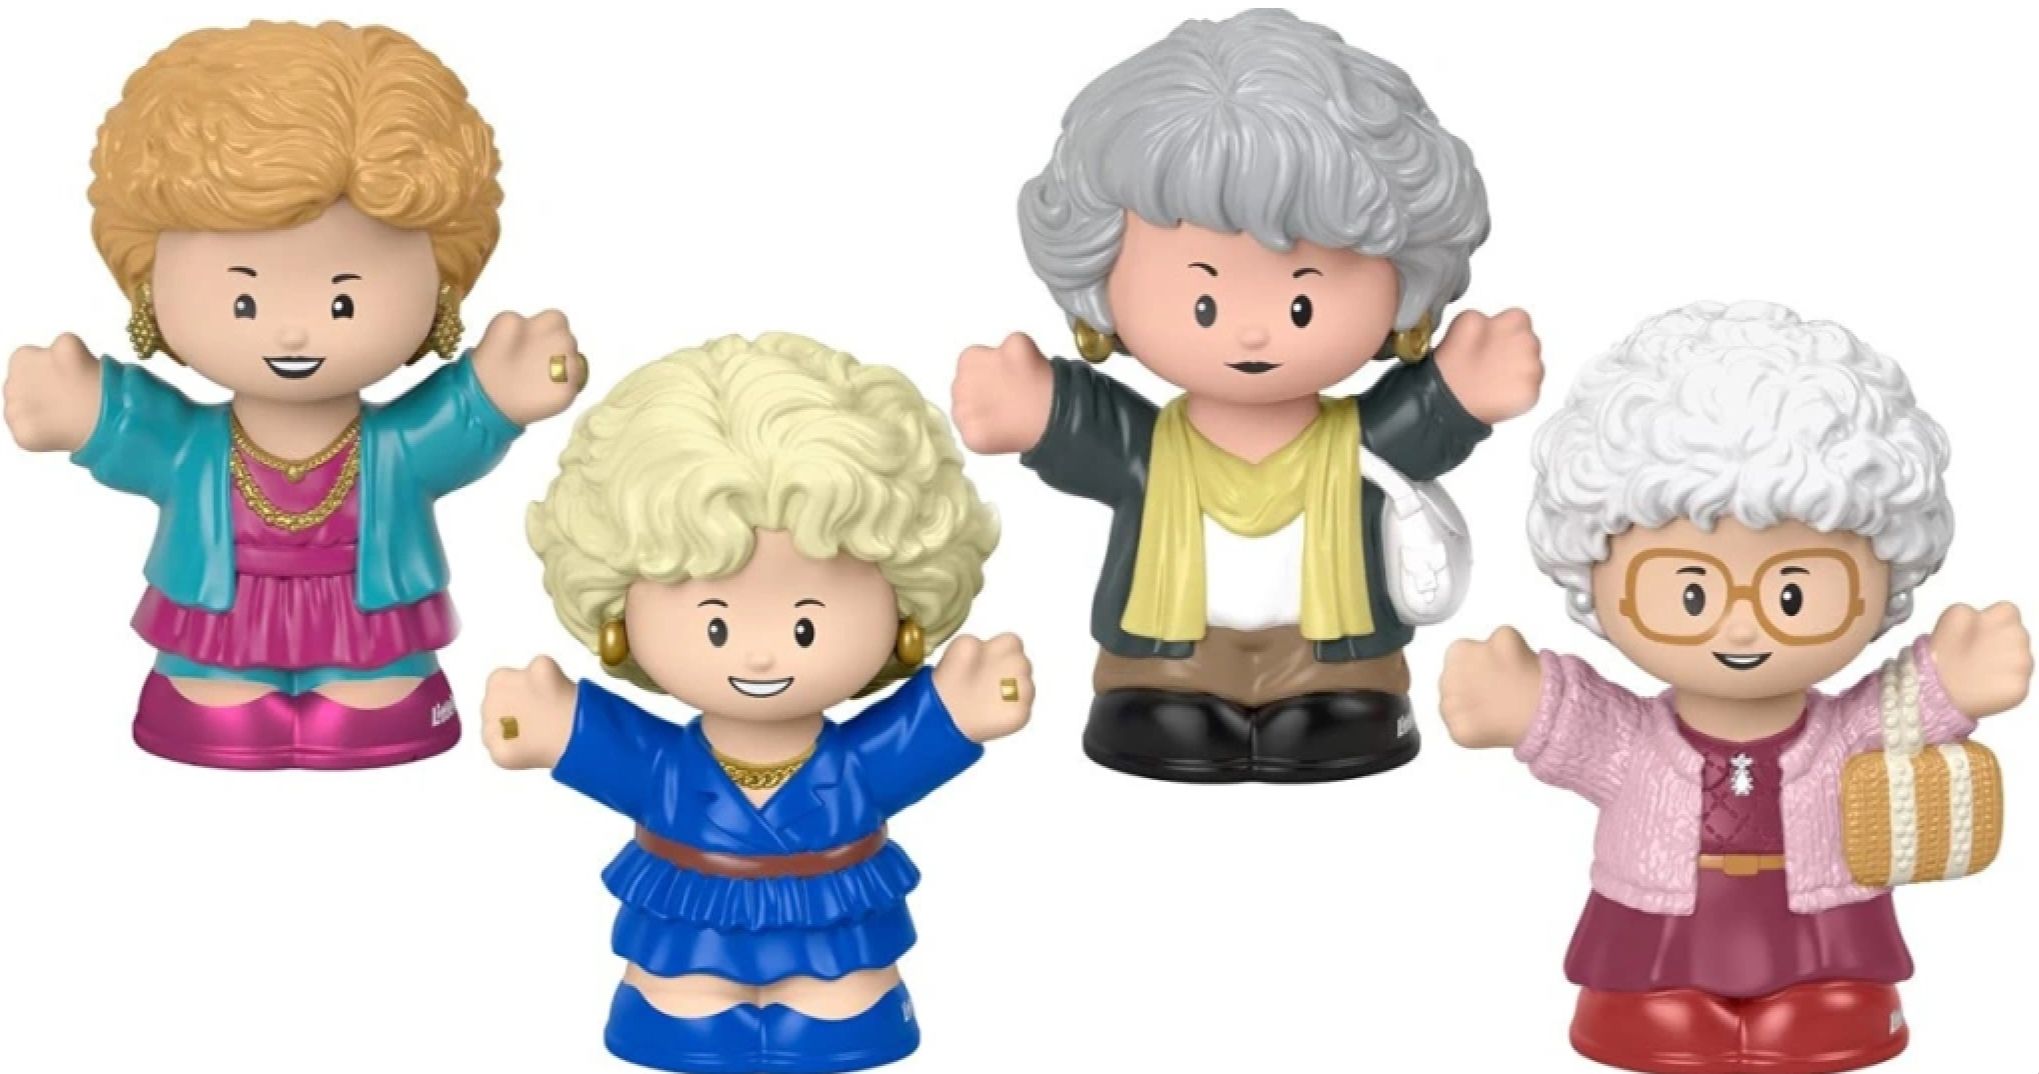 The Golden Girls Little People Collector Set Thanks You for Being a Friend